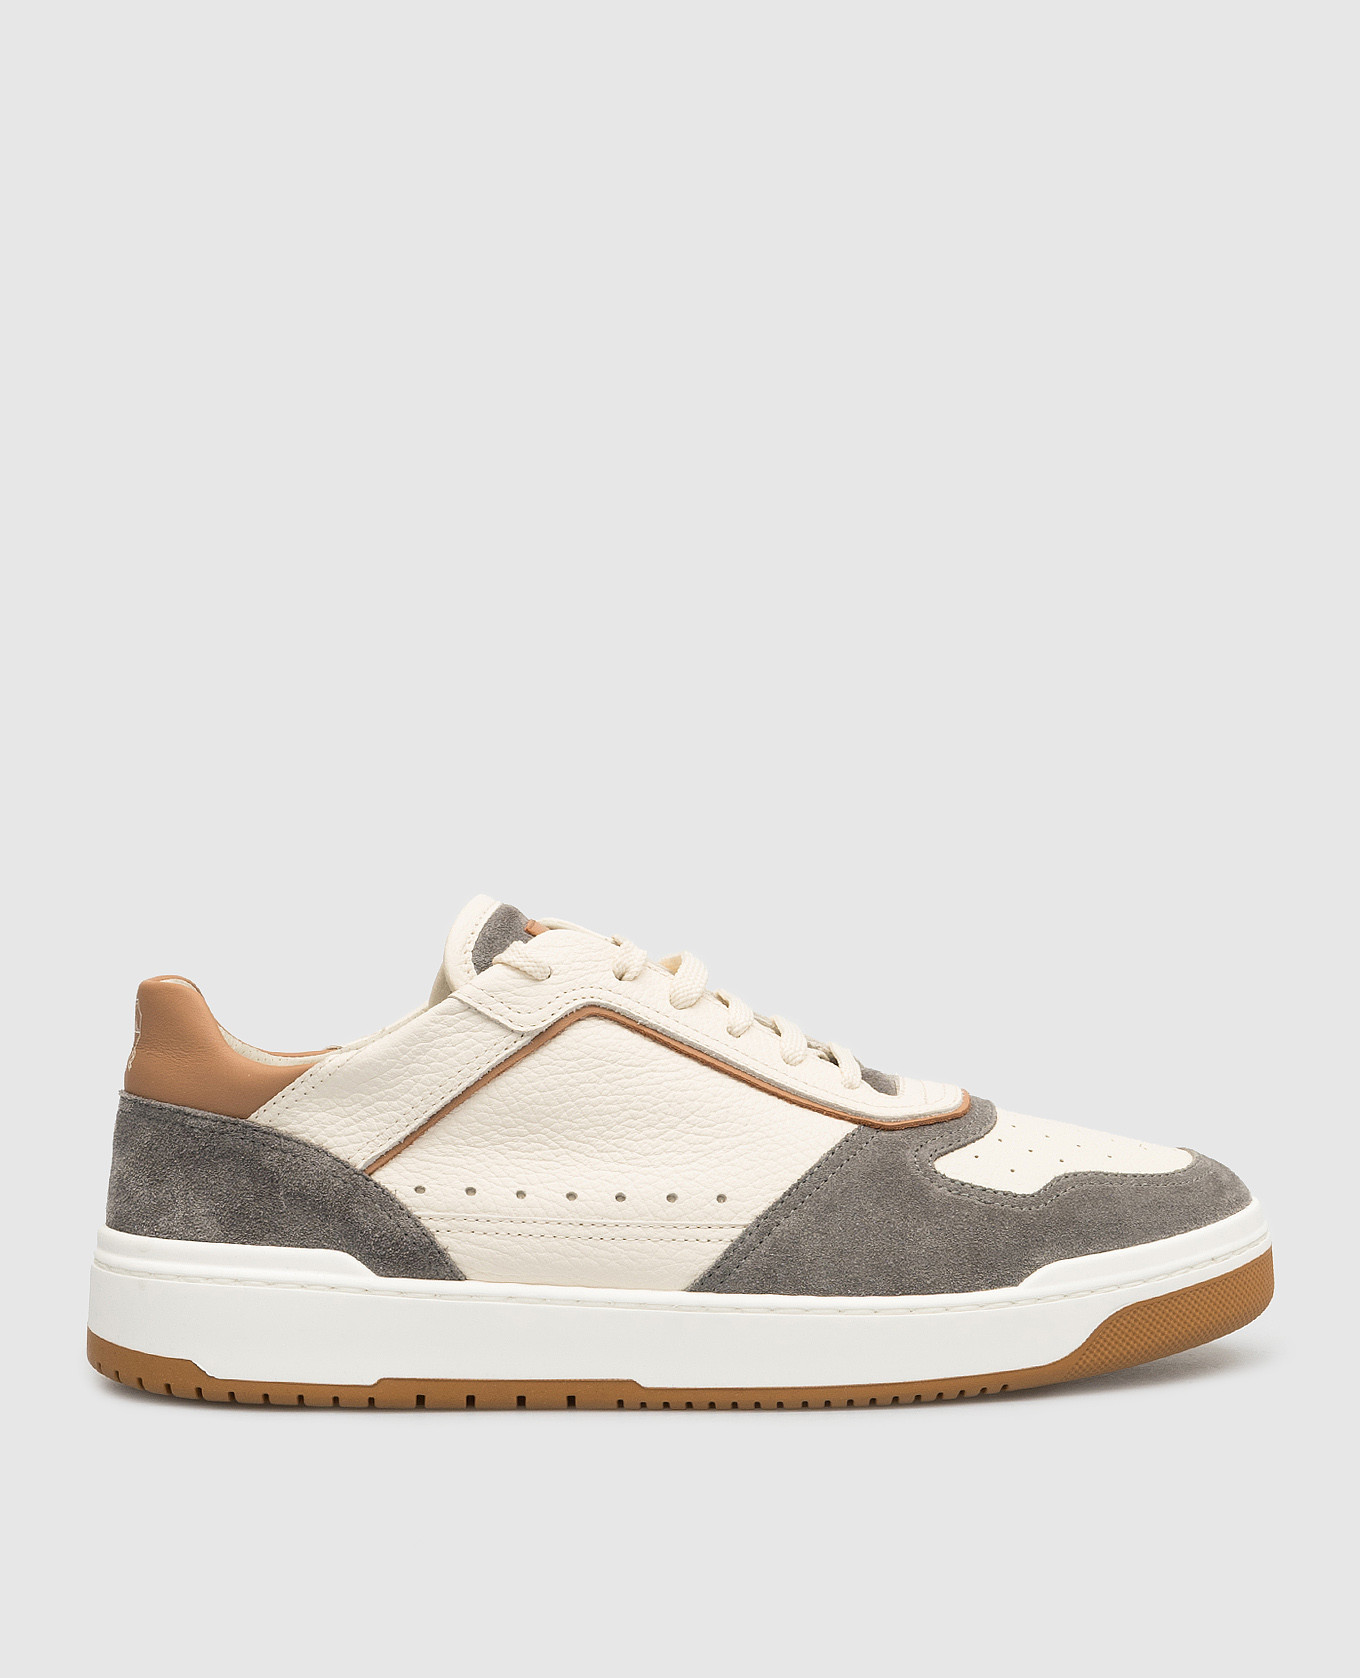 Beige leather sneakers with perforation